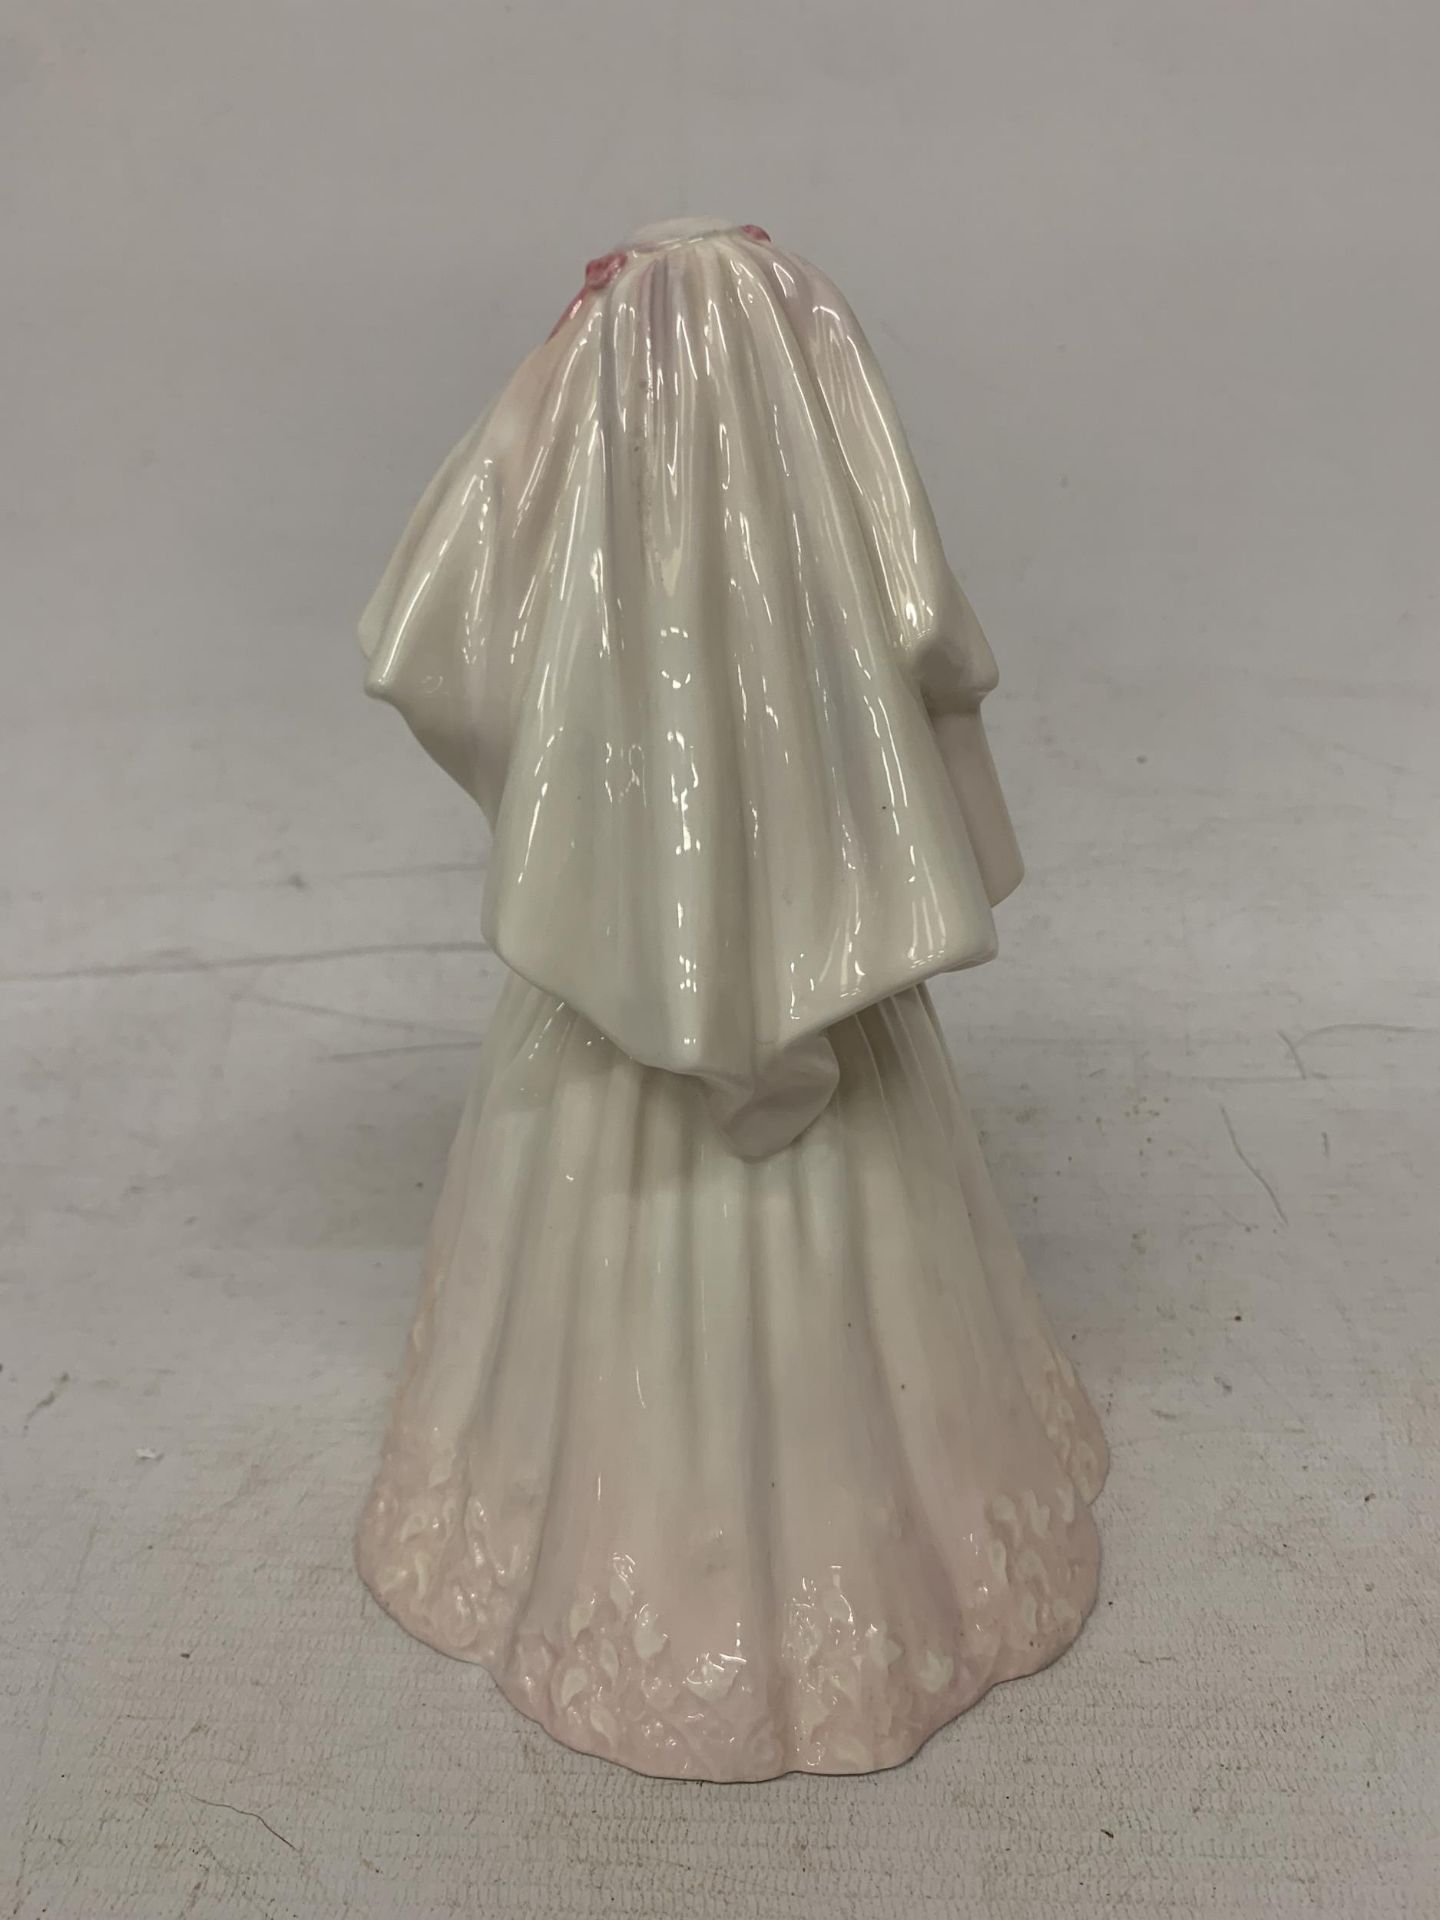 A ROYAL DOULTON FIGURINE "THE BRIDE" HN 2166 - Image 2 of 3